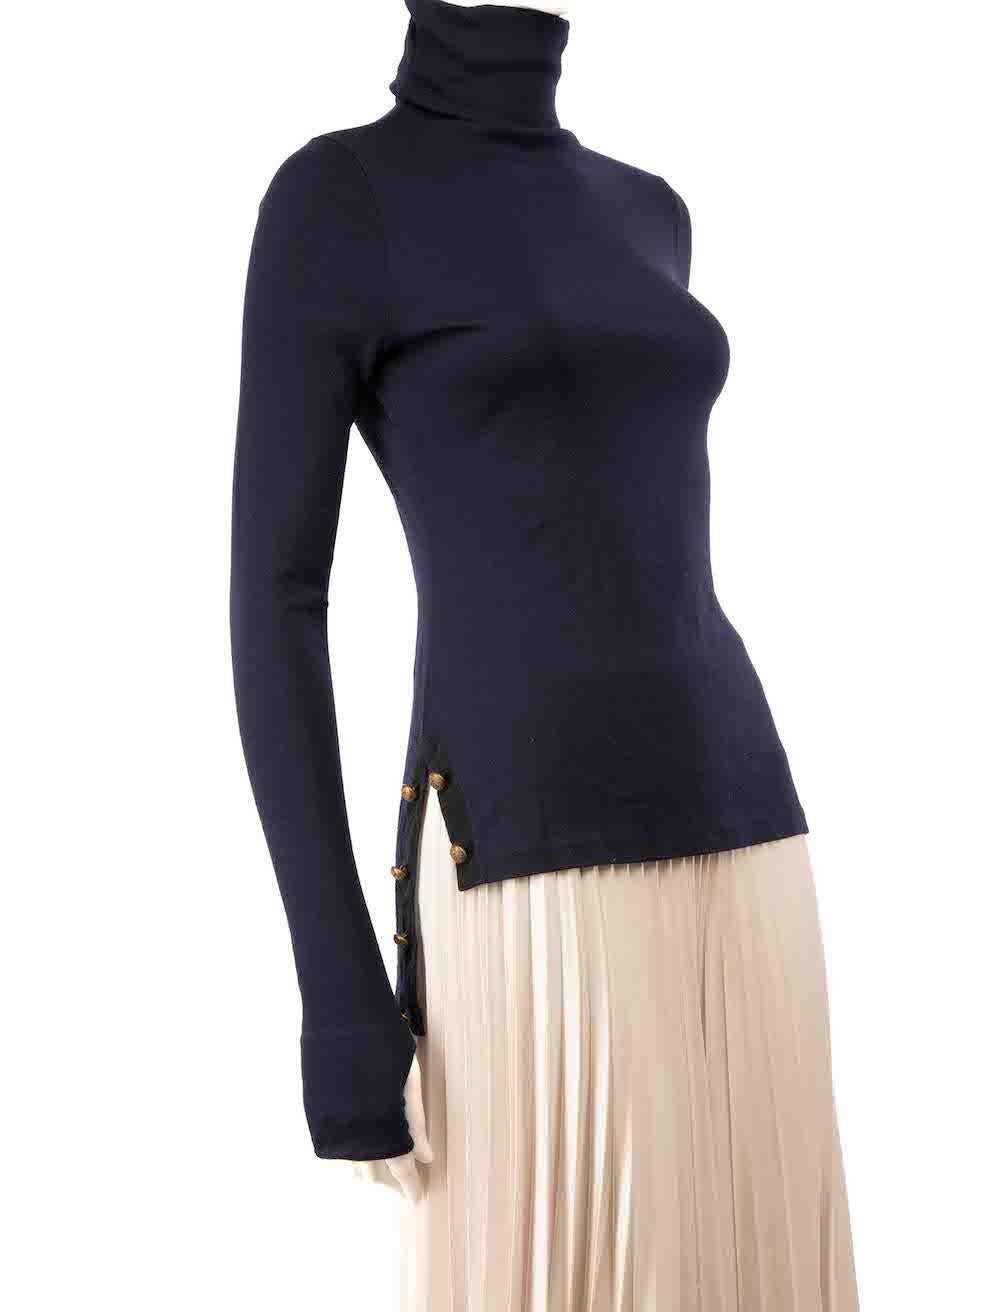 CONDITION is Very good. Minimal wear to top is evident. Overall pilling on this used Alexander McQueen designer resale item.
 
 
 
 Details
 
 
 Navy
 
 Wool
 
 Long sleeves top
 
 Stretchy
 
 Turtleneck
 
 Tumb hole on cuffs
 
 Button detail
 
 
 
